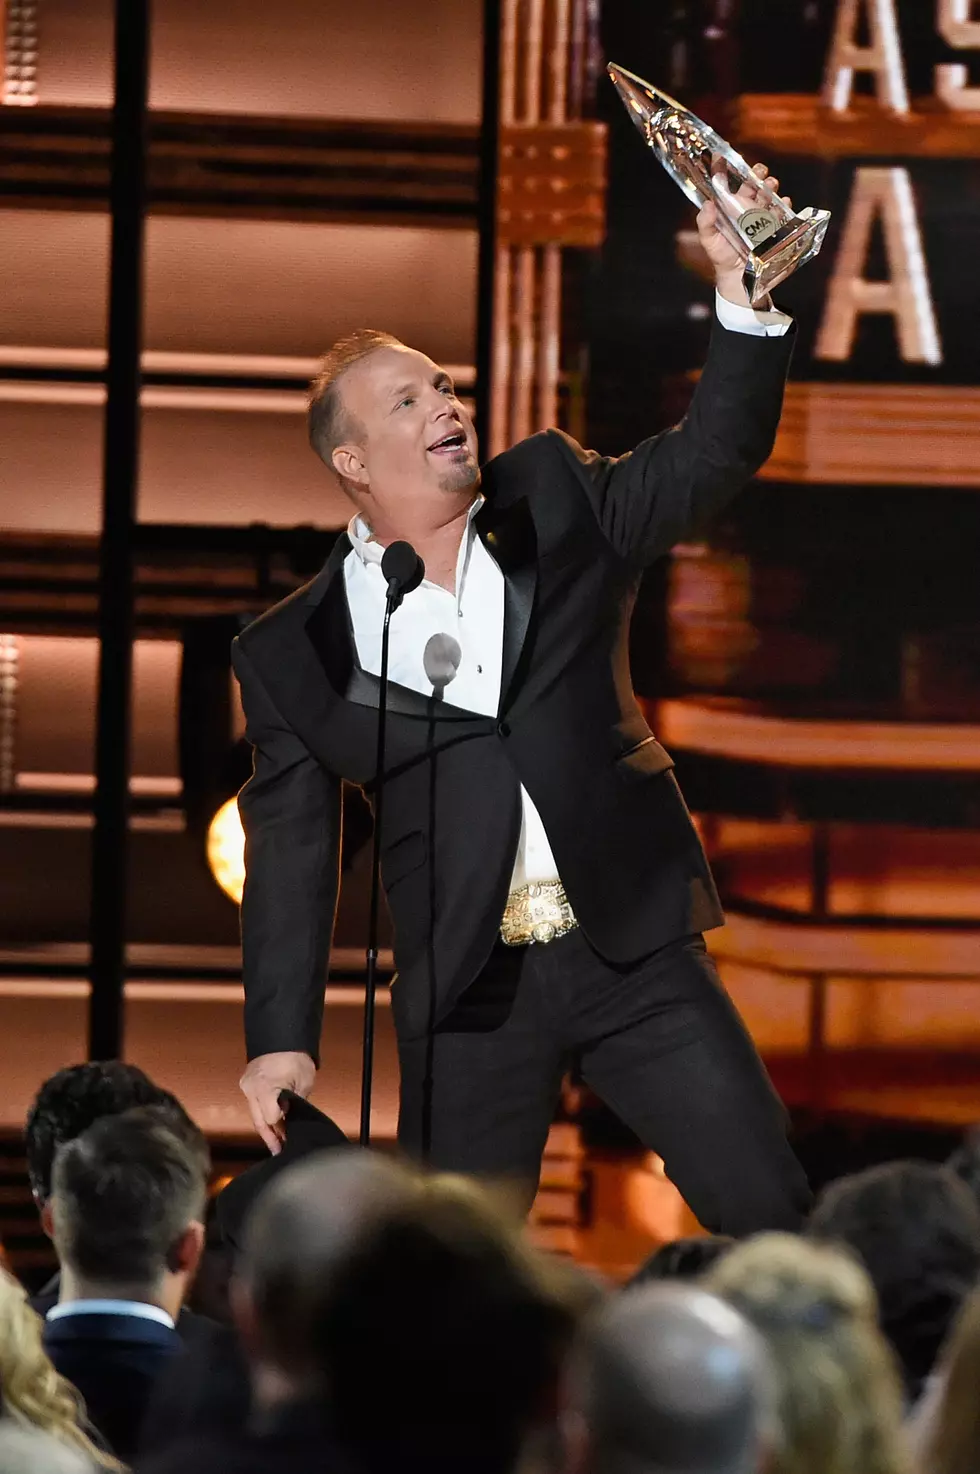 5 Of The Best Moments At The 50th CMA Awards [PHOTOS]